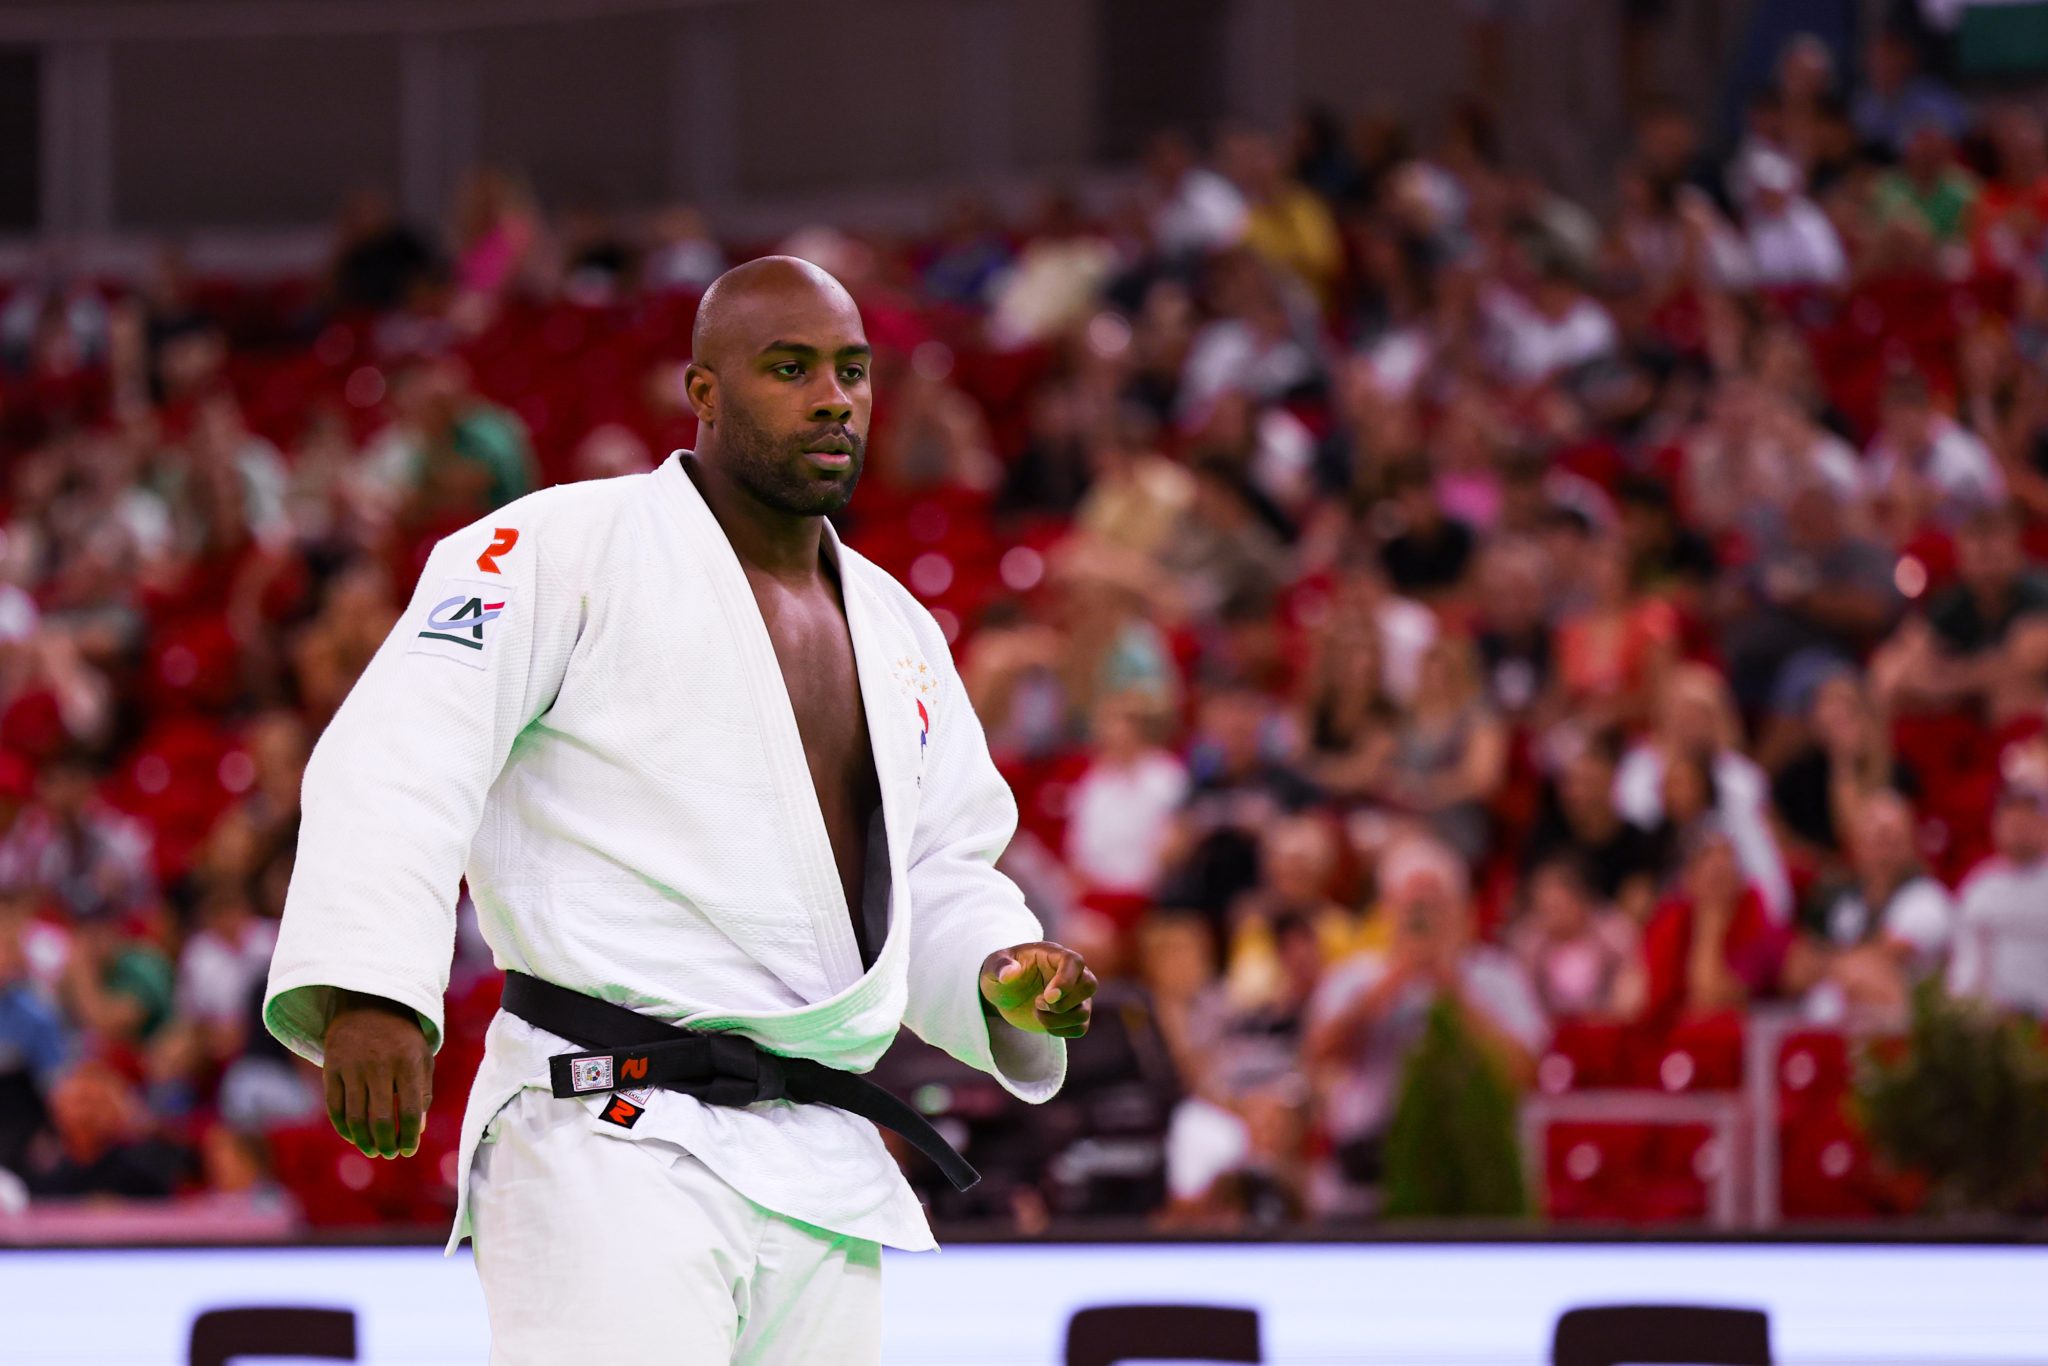 RINER RETURNS FOR FOURTH OLYMPIAD: PARIS IS PERSONAL